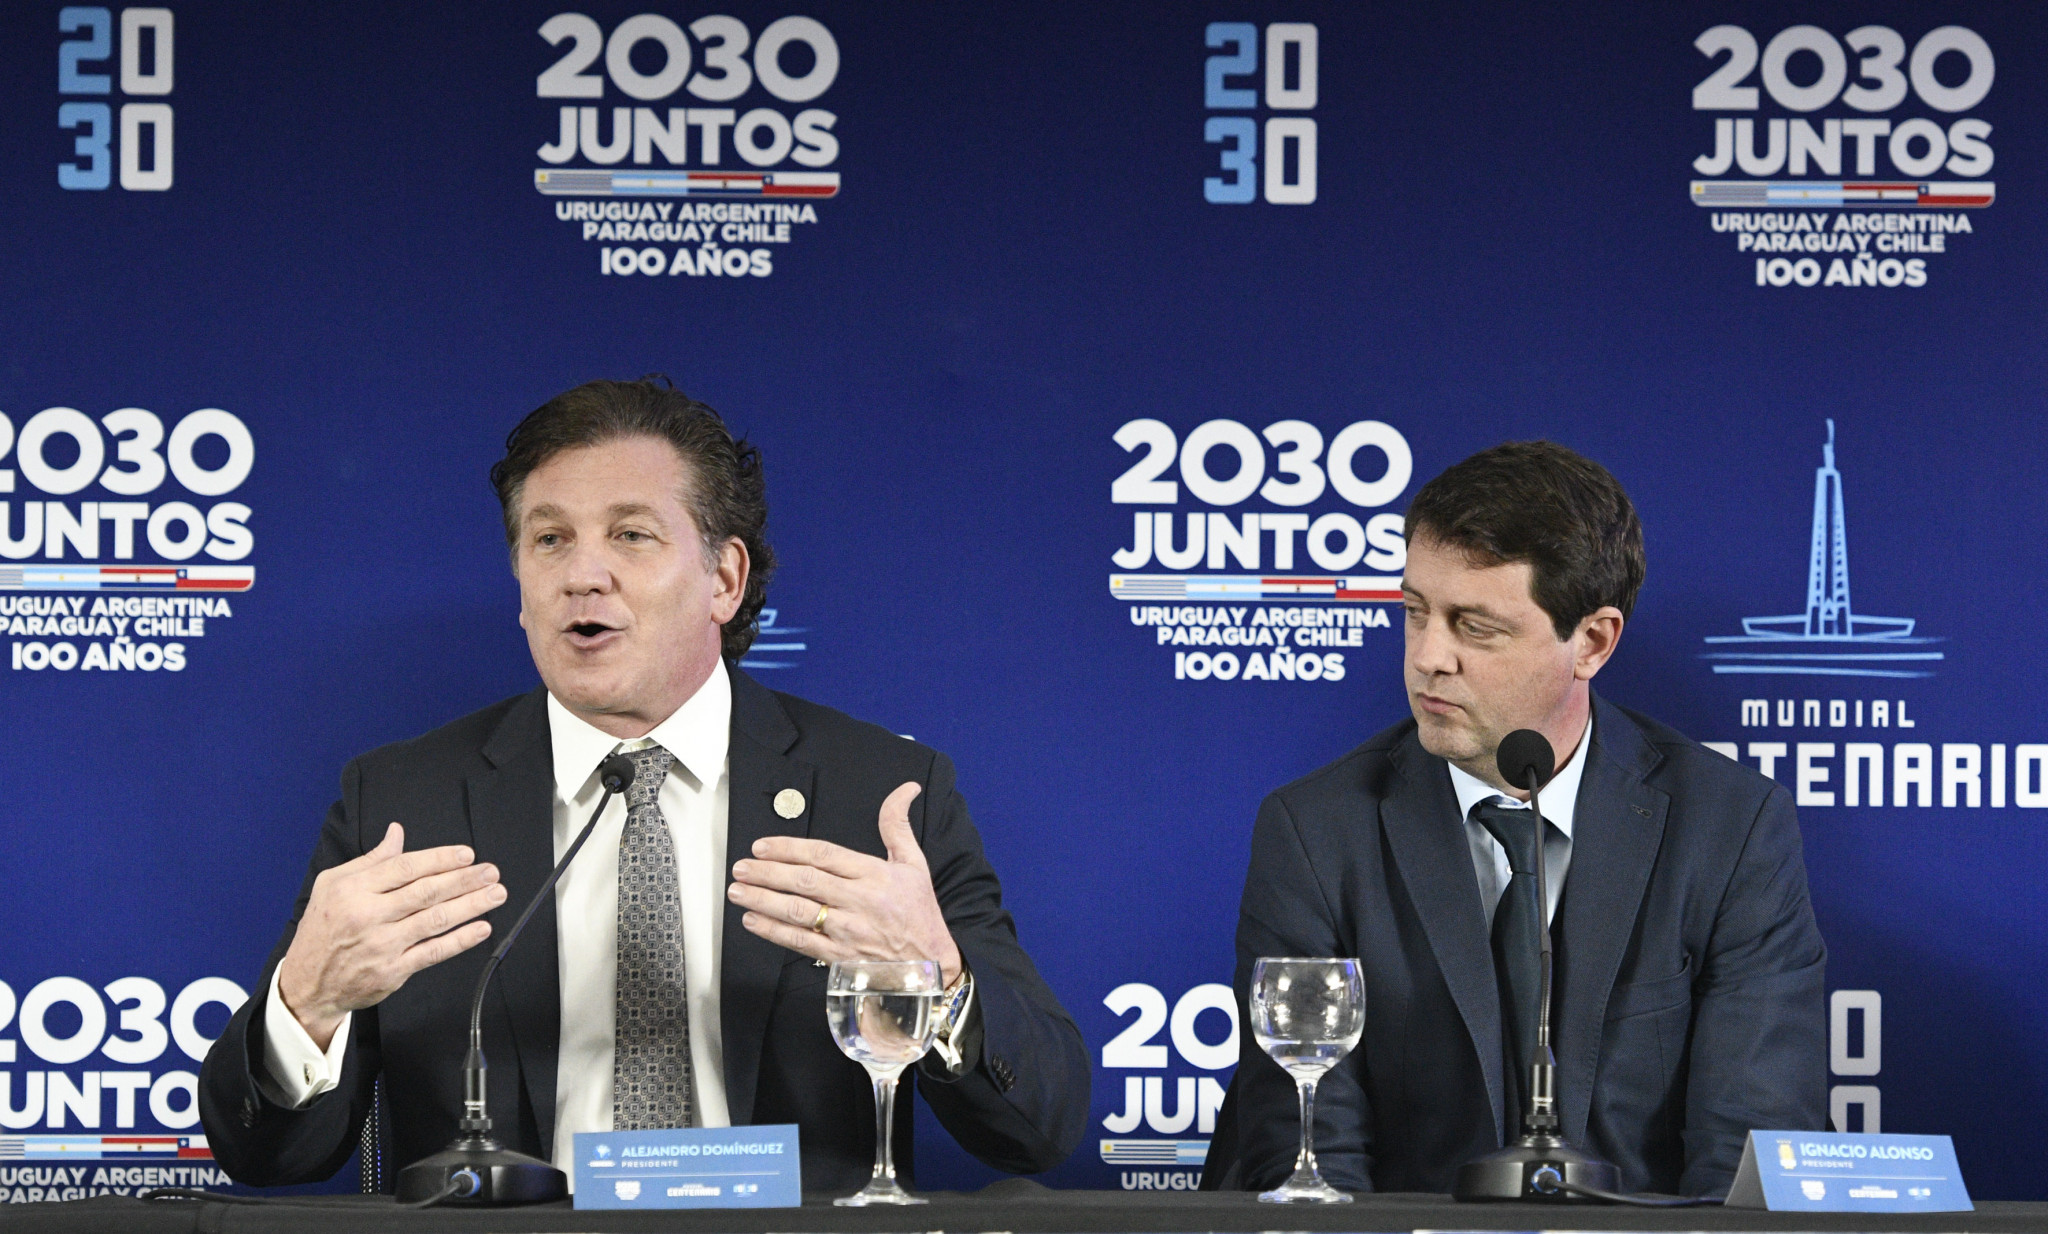 Argentina, Chile, Uruguay and Paraguay launch joint bid to host 2030 FIFA World Cup